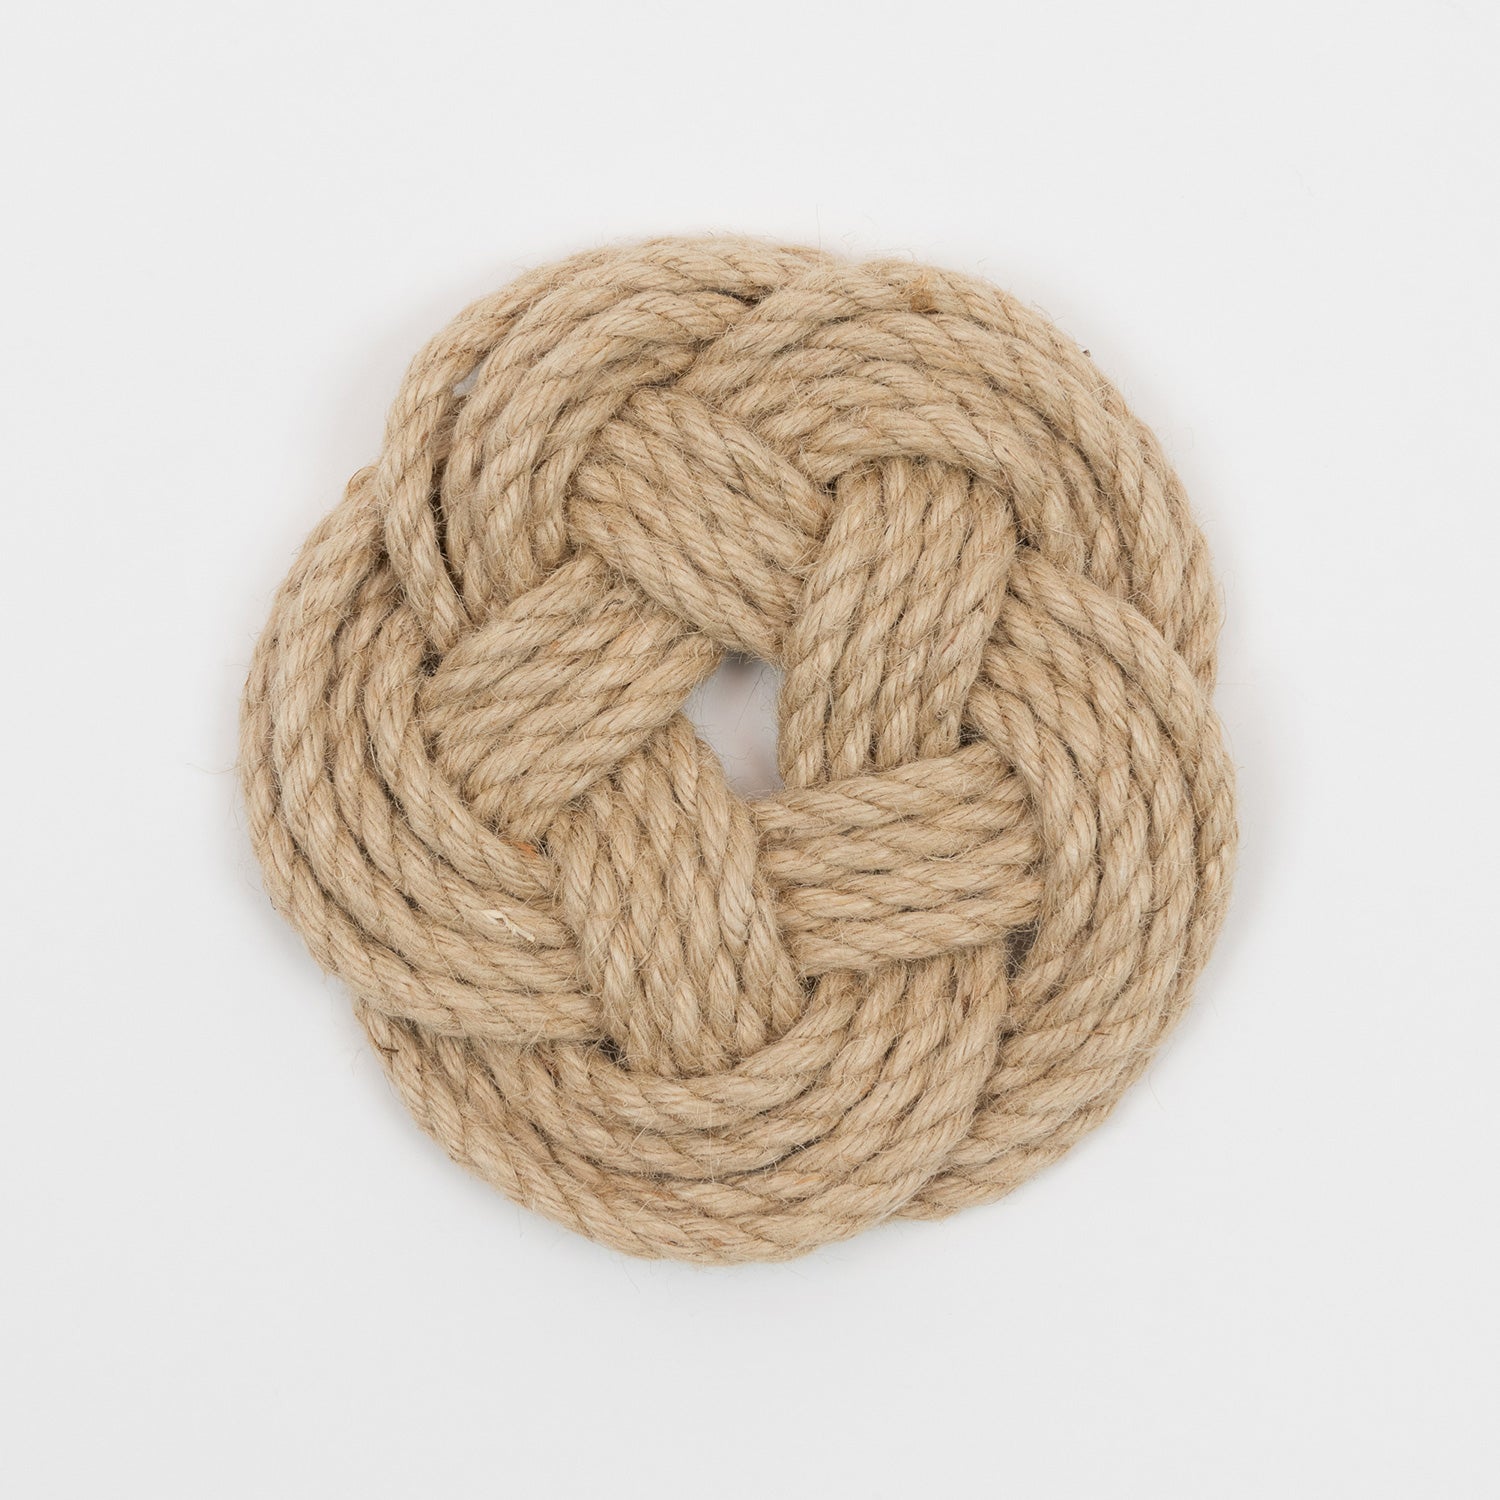 Top down view of a light brown knotted rope trivet in a circular shape.